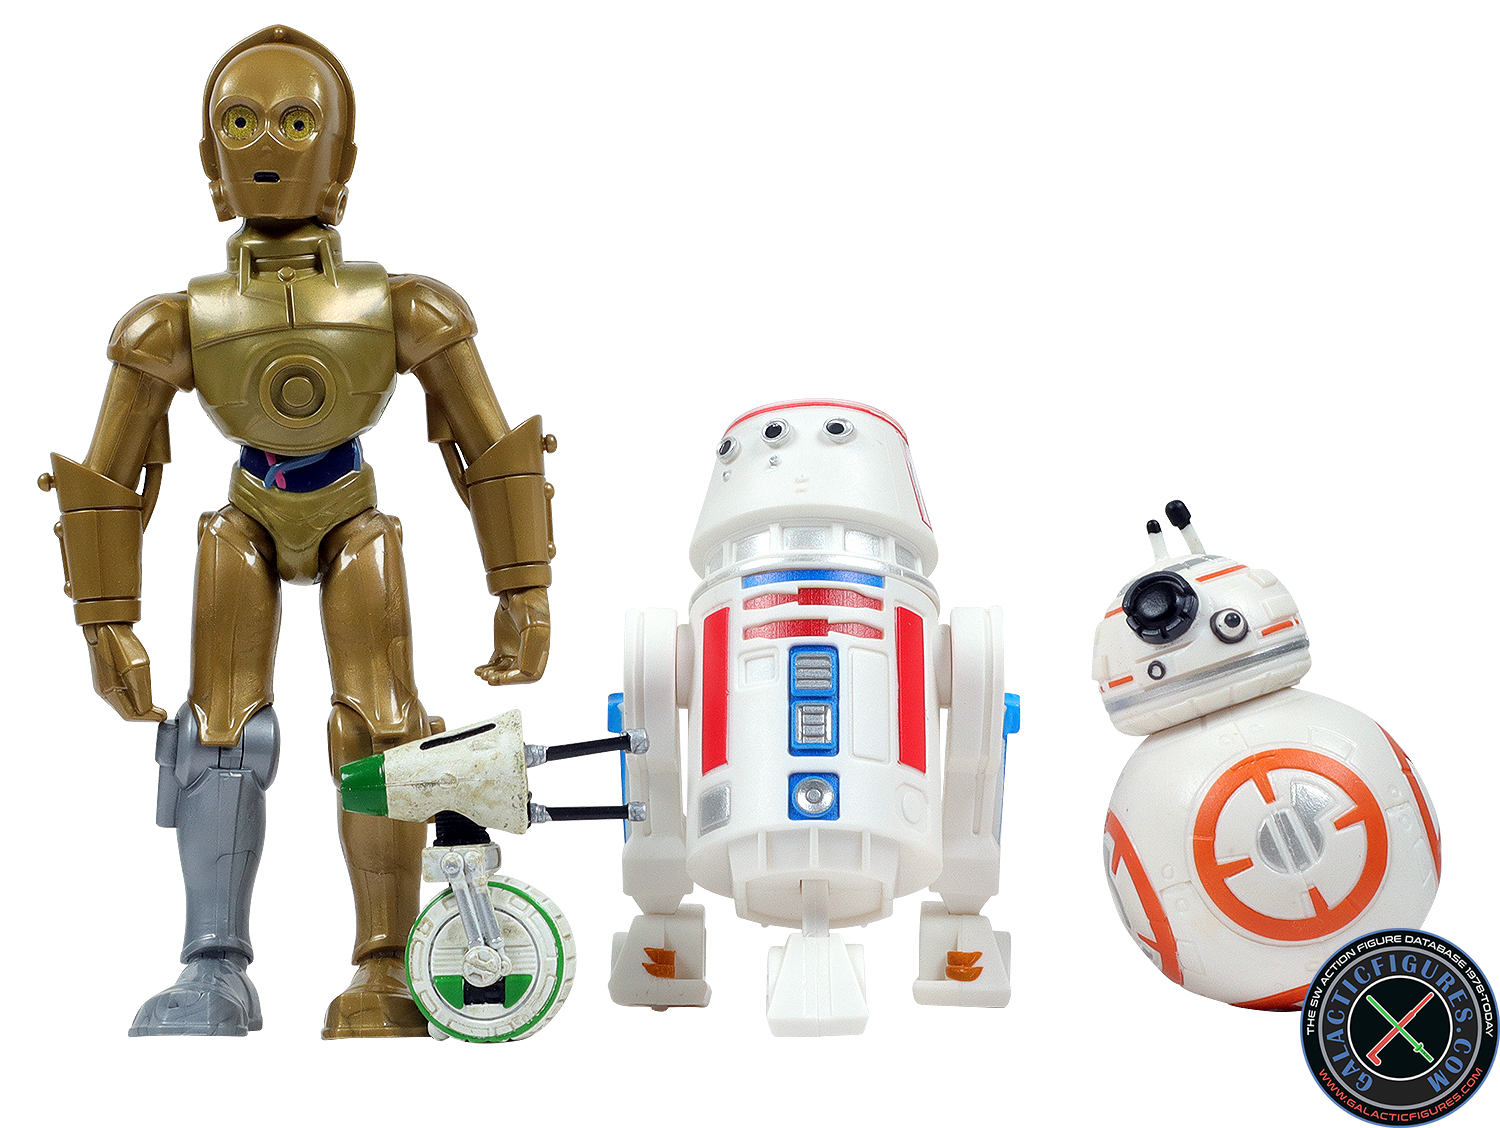 BB-8 4-Pack With C-3PO, R5-D4 And D-0